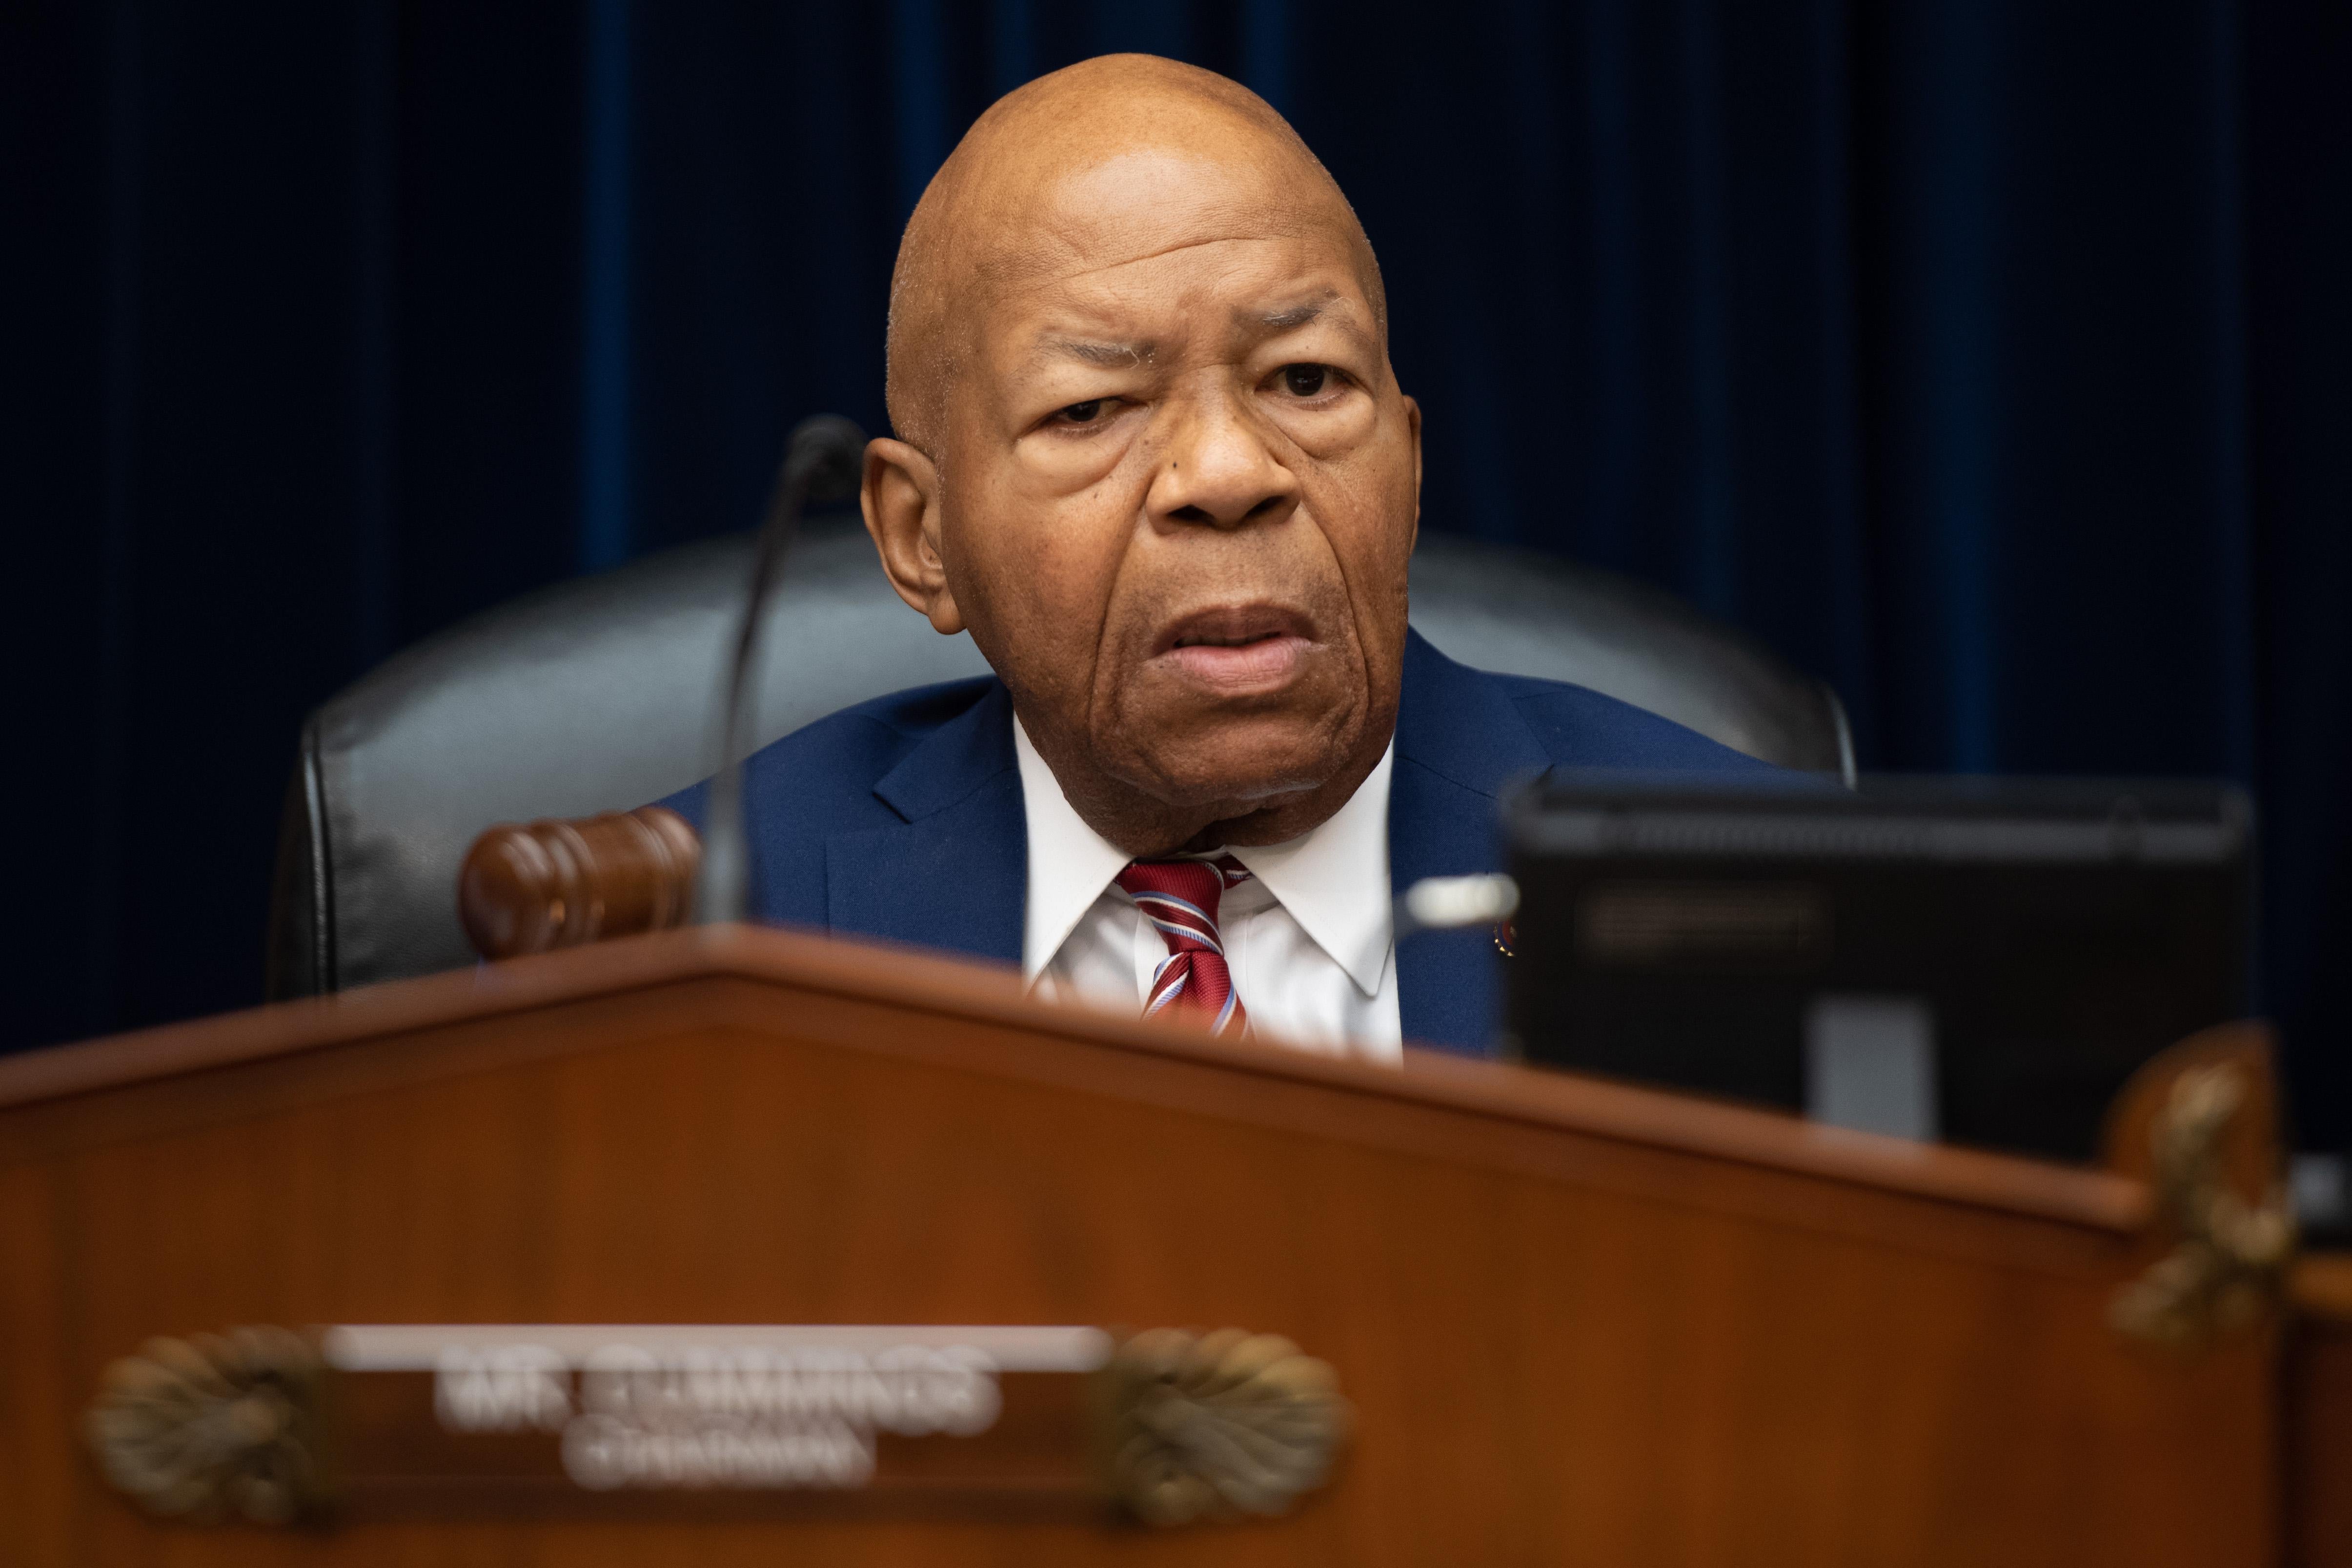 Rep. Elijah Cummings, Democrat of Maryland and Chairman of the House Oversight and Reform Committee, arrives for a committee hearing on Capitol Hill in Washington, D.C. on July 18, 2019. 